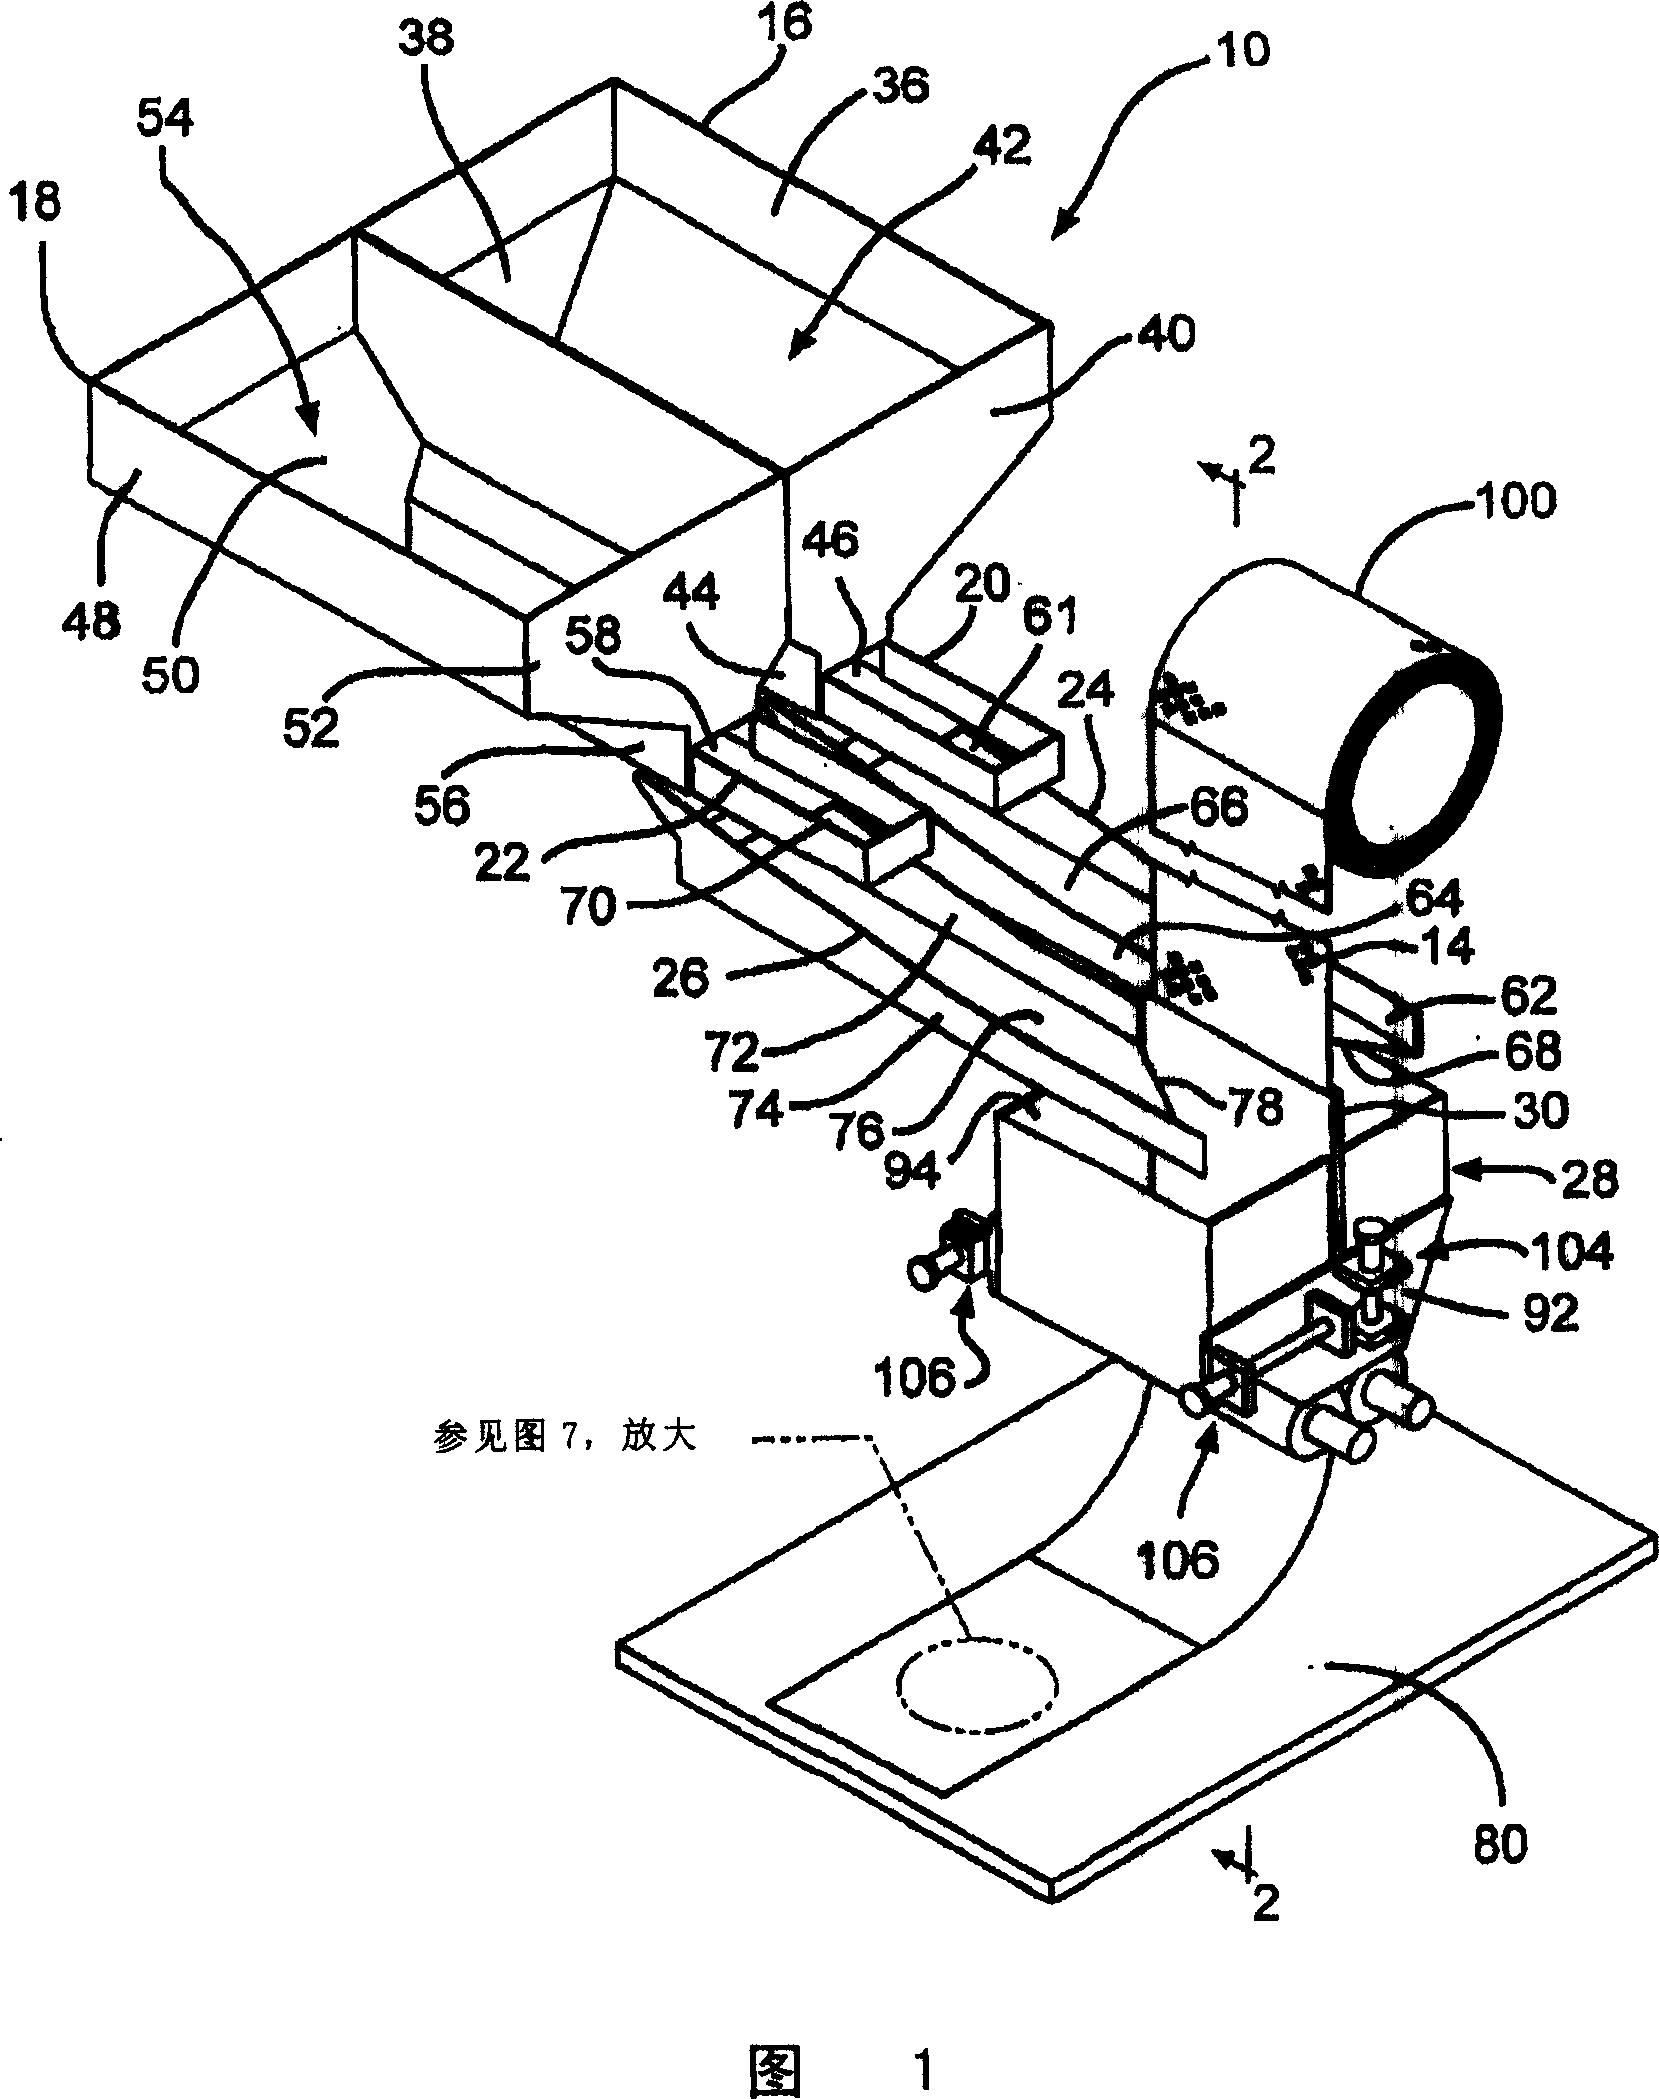 Apparatus and method for fabricating cathode collectors for lithium/oxyhalide electrochemical cells